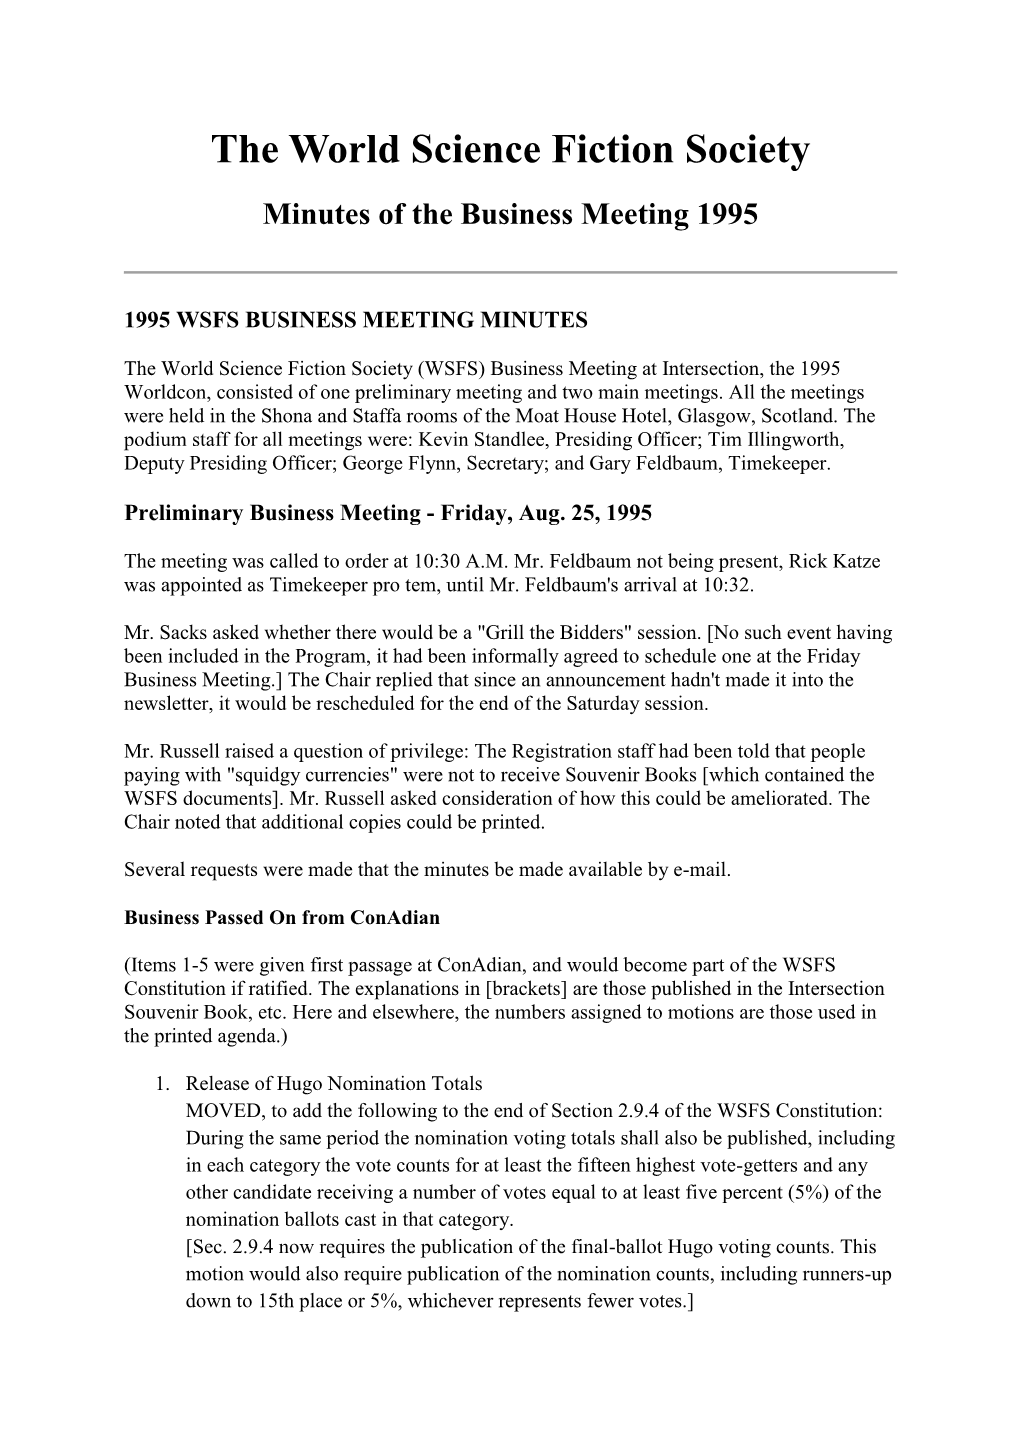 The World Science Fiction Society Minutes of the Business Meeting 1995